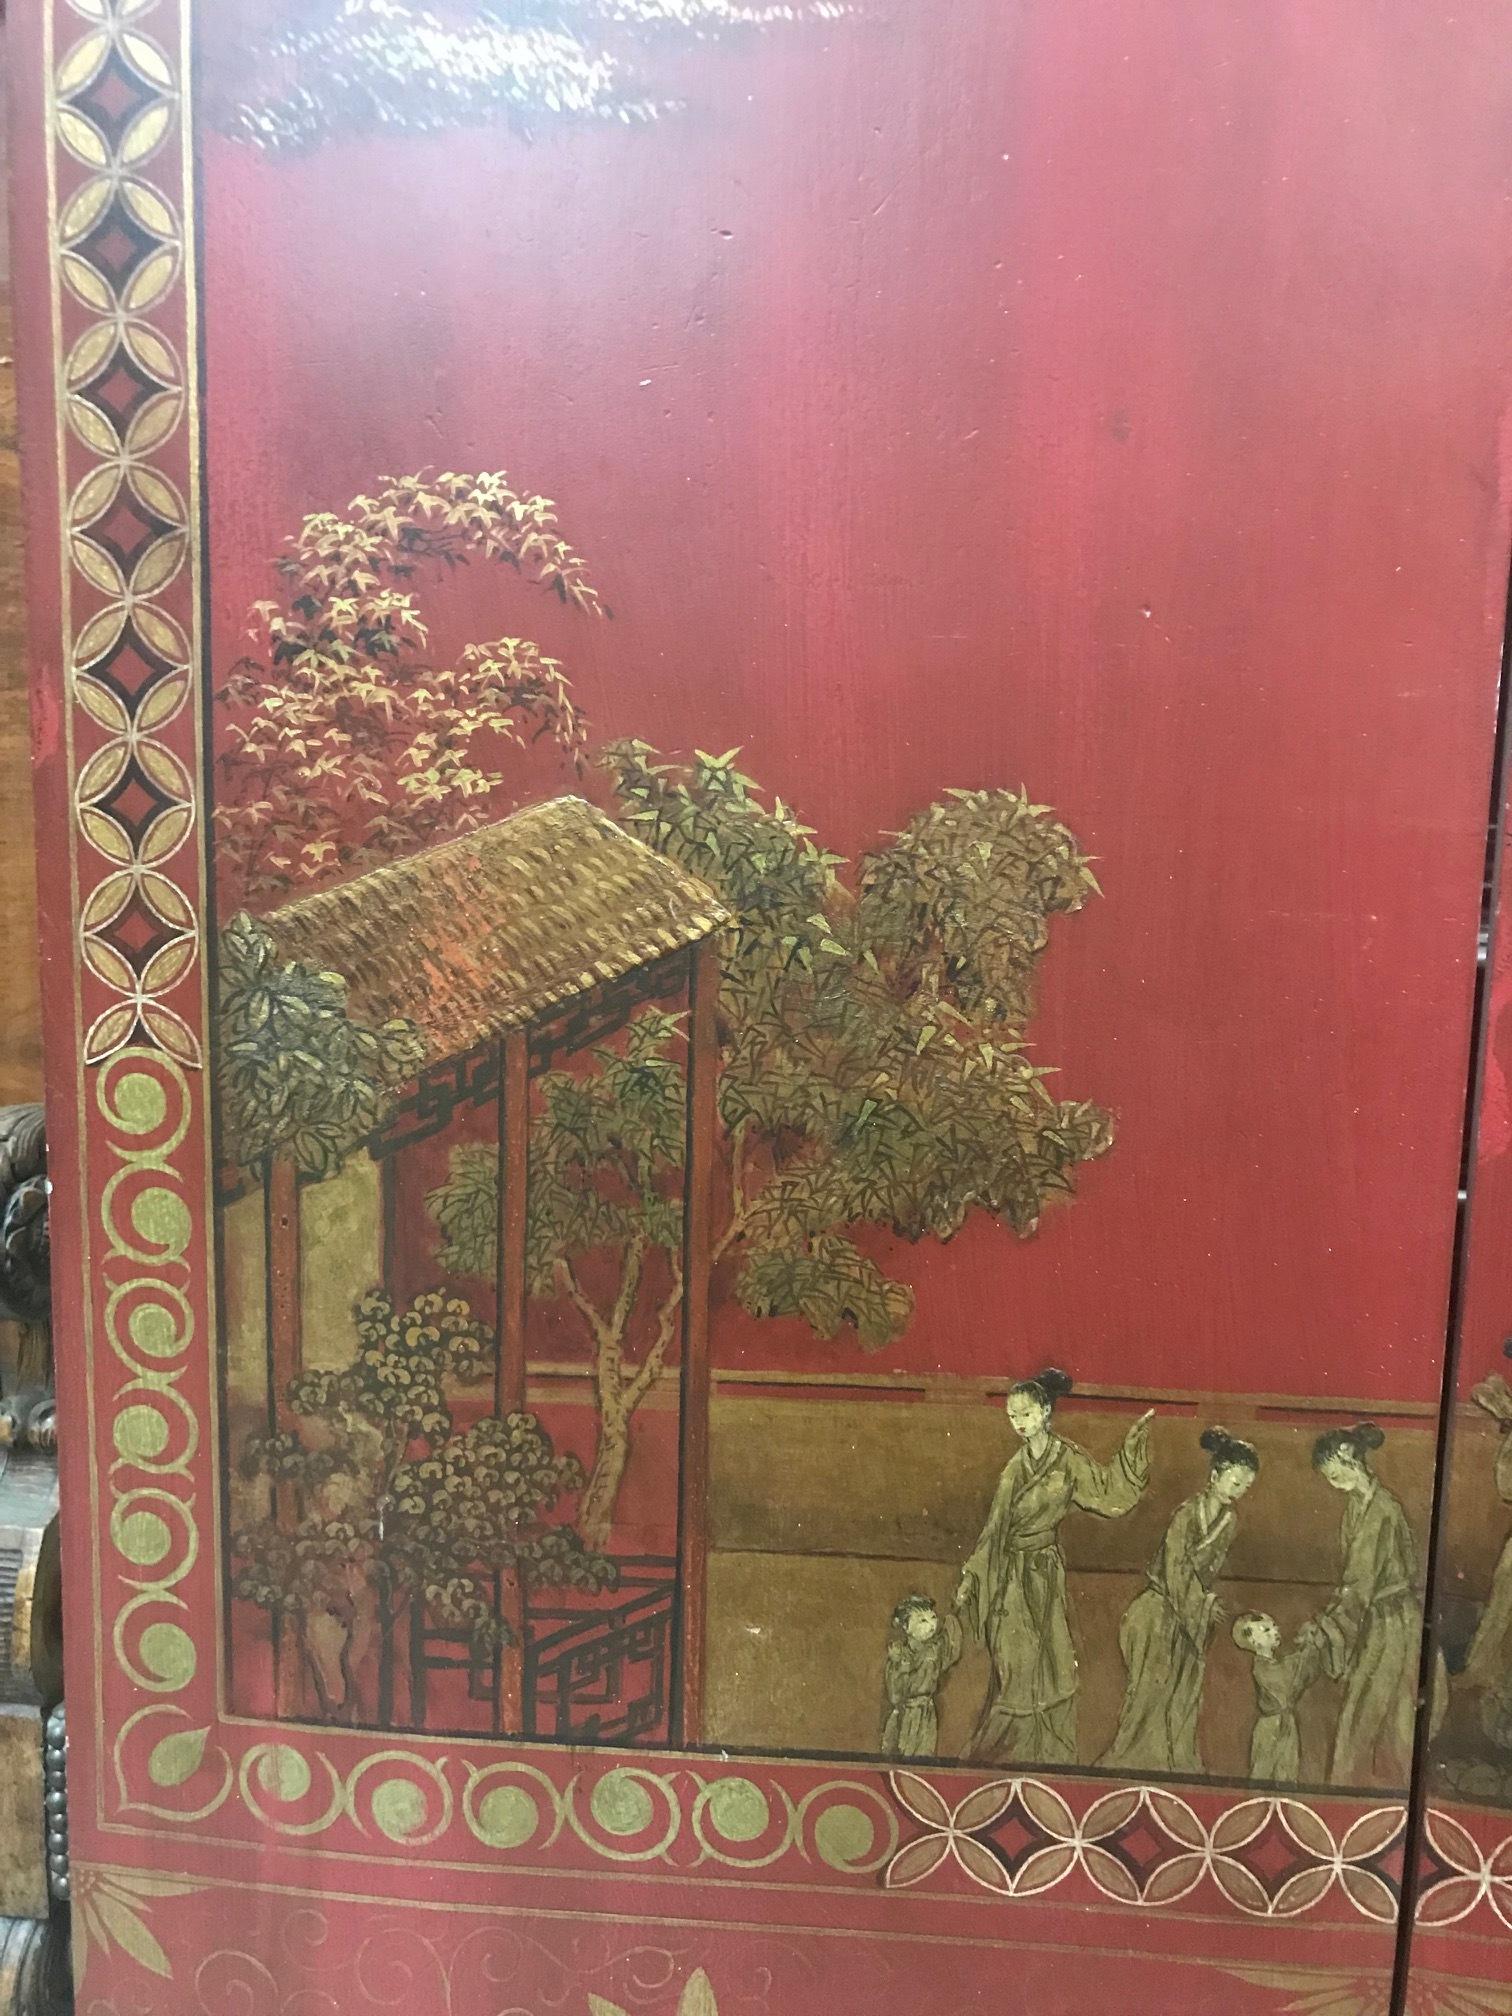 Attractive 19 century Asian red polychromed and parcel gilt four panel floor screen.
Beautifully gold and red decorated with gesso depicting Asian garden full of birds, cranes, waterfalls, trees and flowers.
The back also decorated showing a